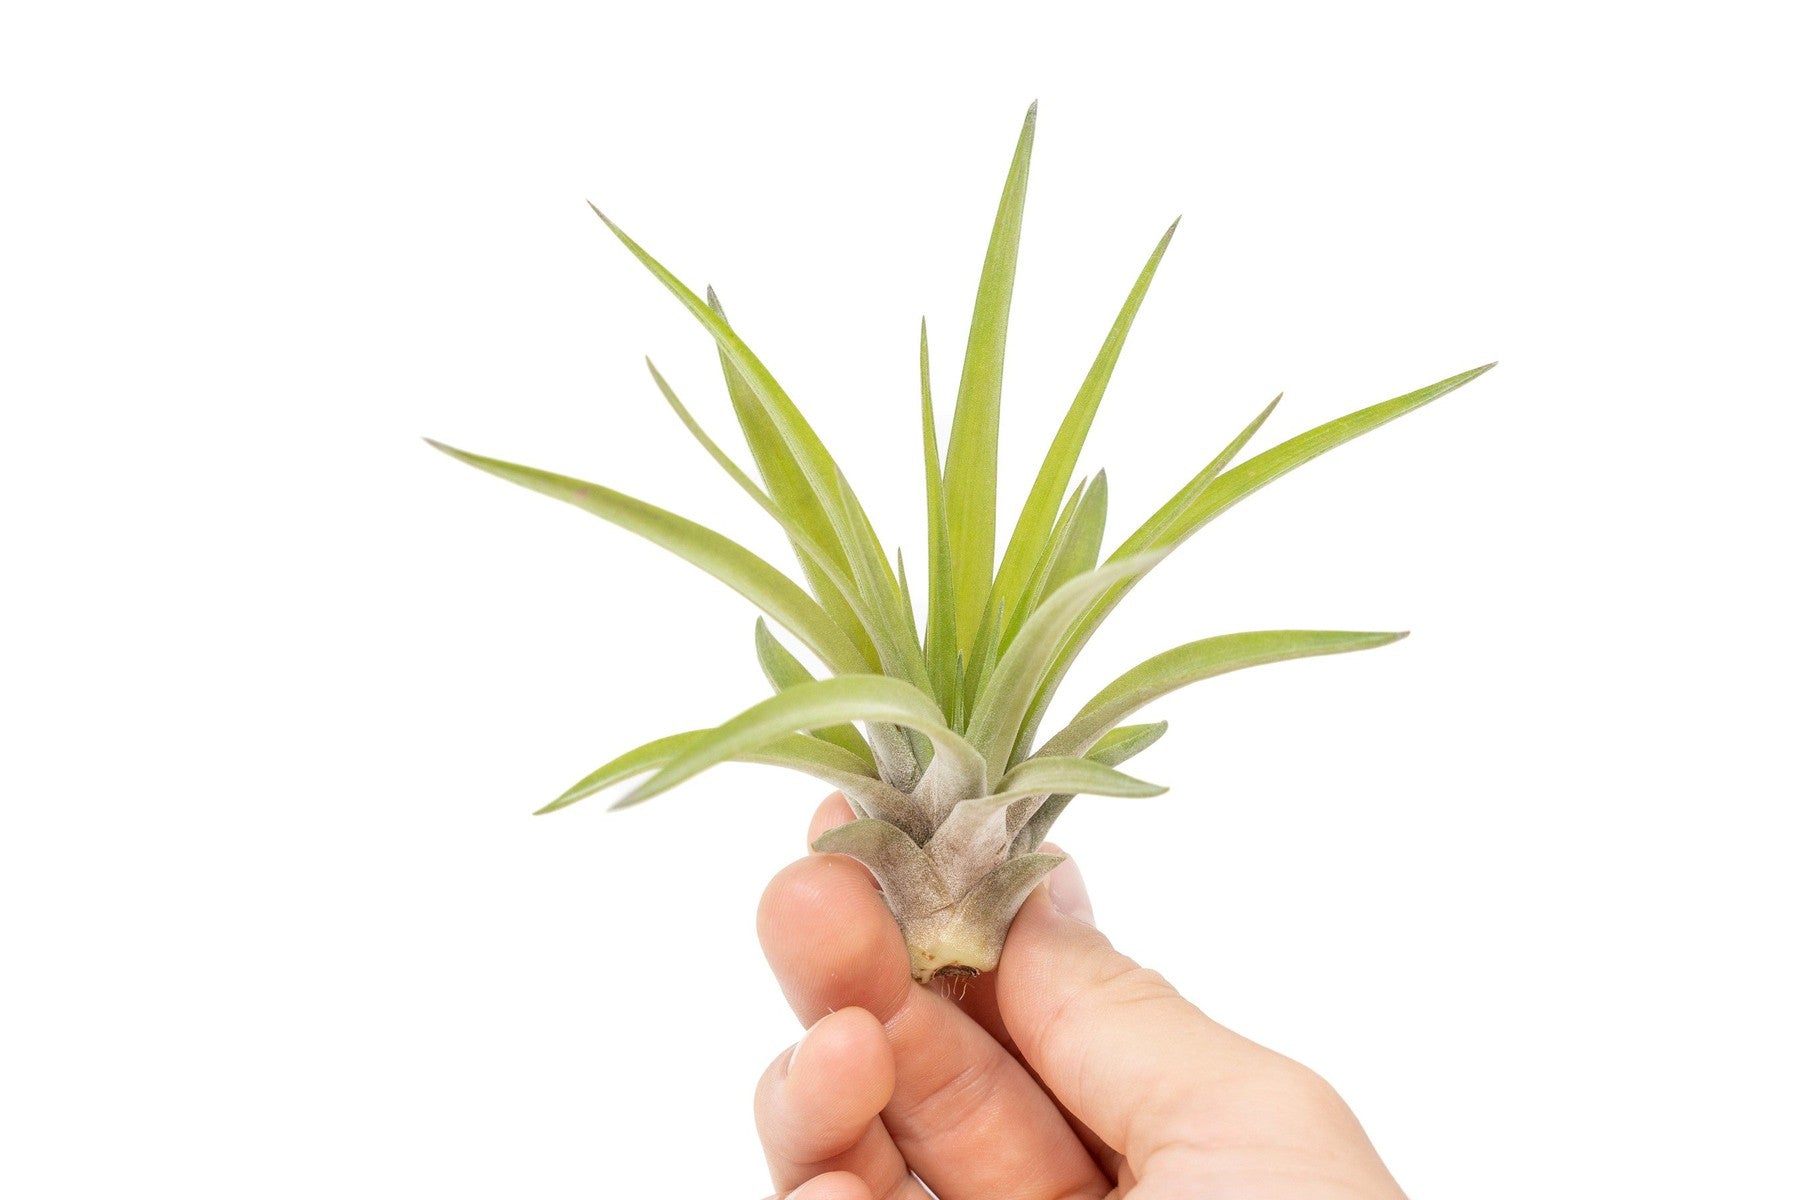 SALE - Large Tillandsia Velutina Air Plants - Set of 5 or 10 - 50% Off-airplant-The Succulent Source